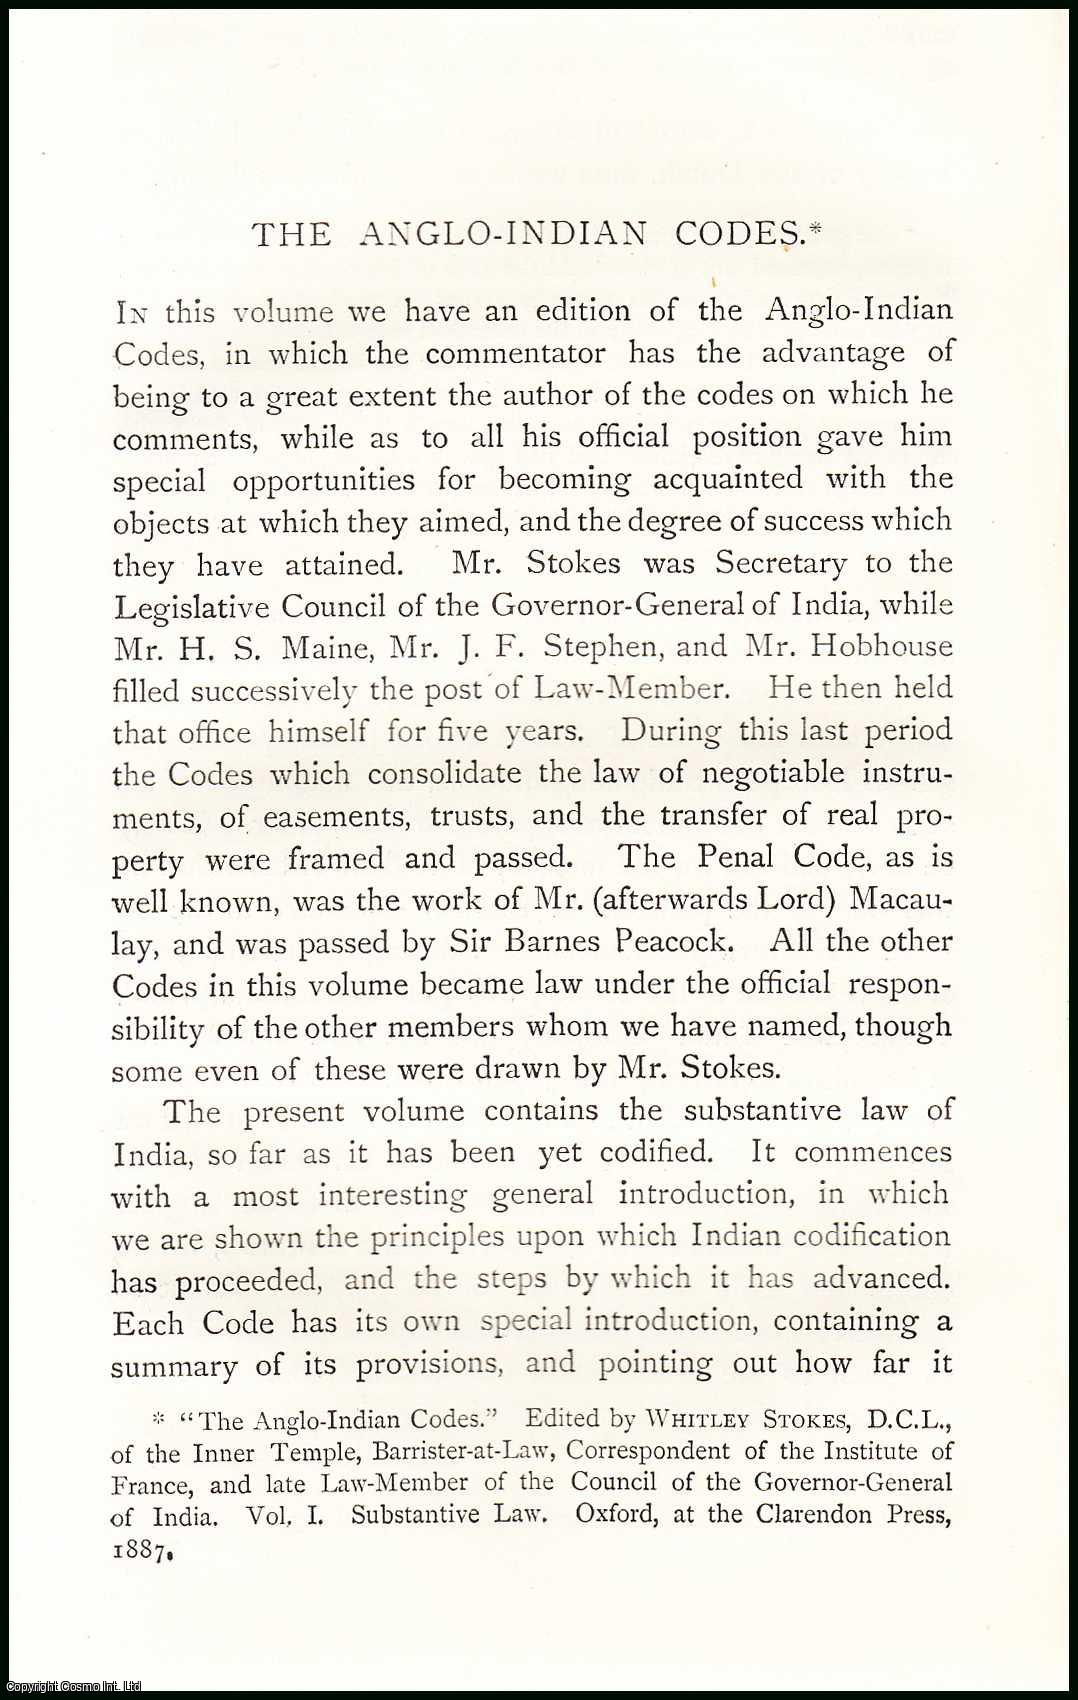 John D. Mayne - The Anglo-Indian Codes : consolidate the law of negotiable instruments, of easements, trusts, & the transfer of real property. An uncommon original article from The Asiatic Quarterly Review, 1887.